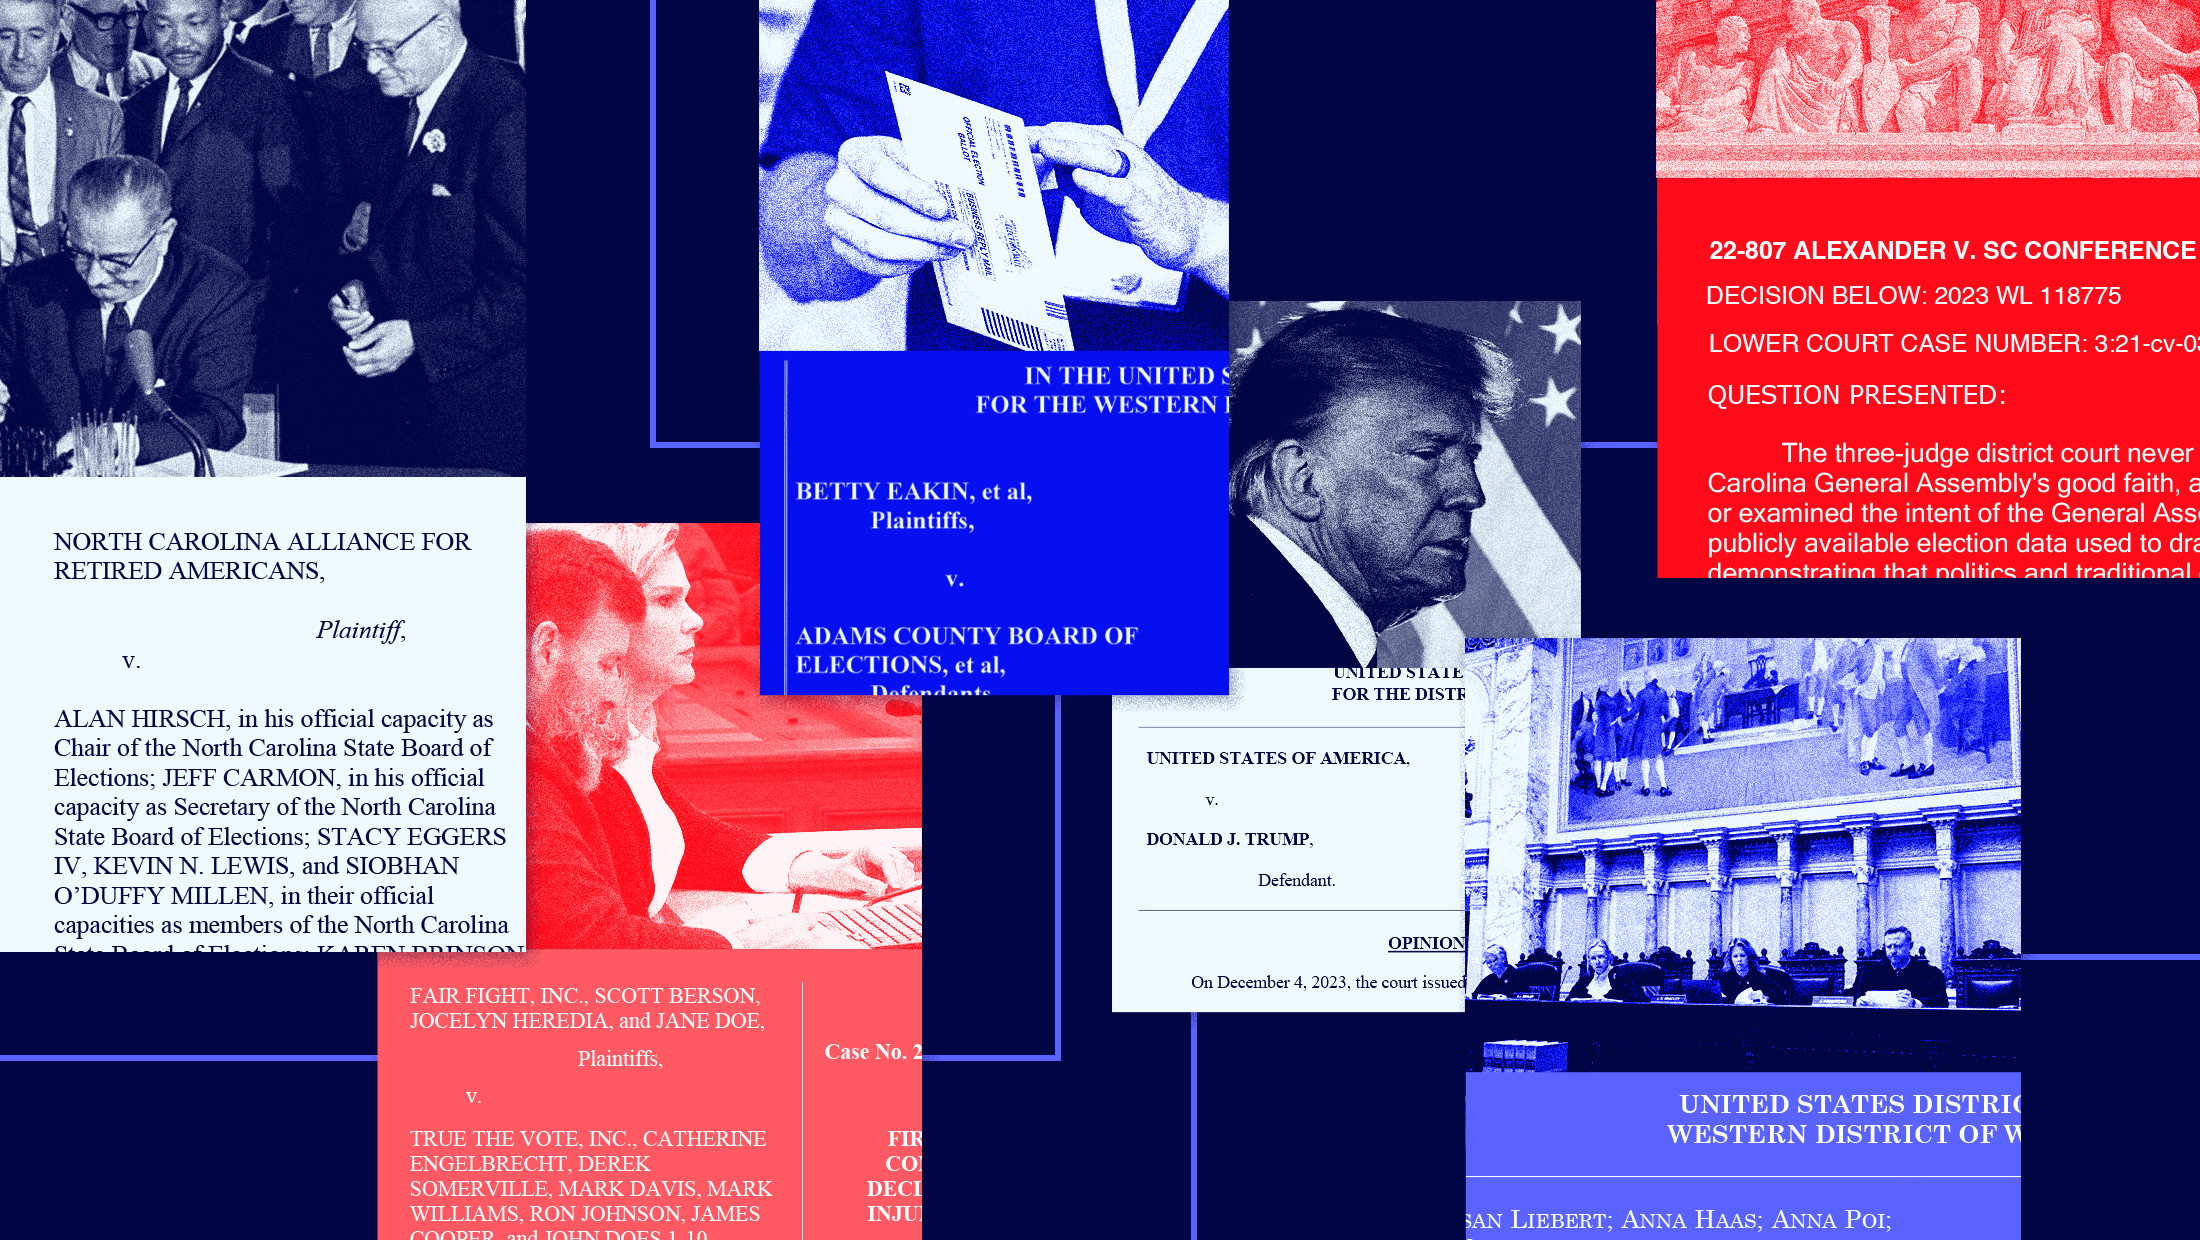 Blue background with collage of blue and red toned images of court documents in various voting rights cases in North Carolina, Georgia, South Carolina, as well as Trump's Washington D.C. federal indictment. There are also images of Trump, the signing of the Voting Rights Act in 1965 and someone holding a mail-in ballot.